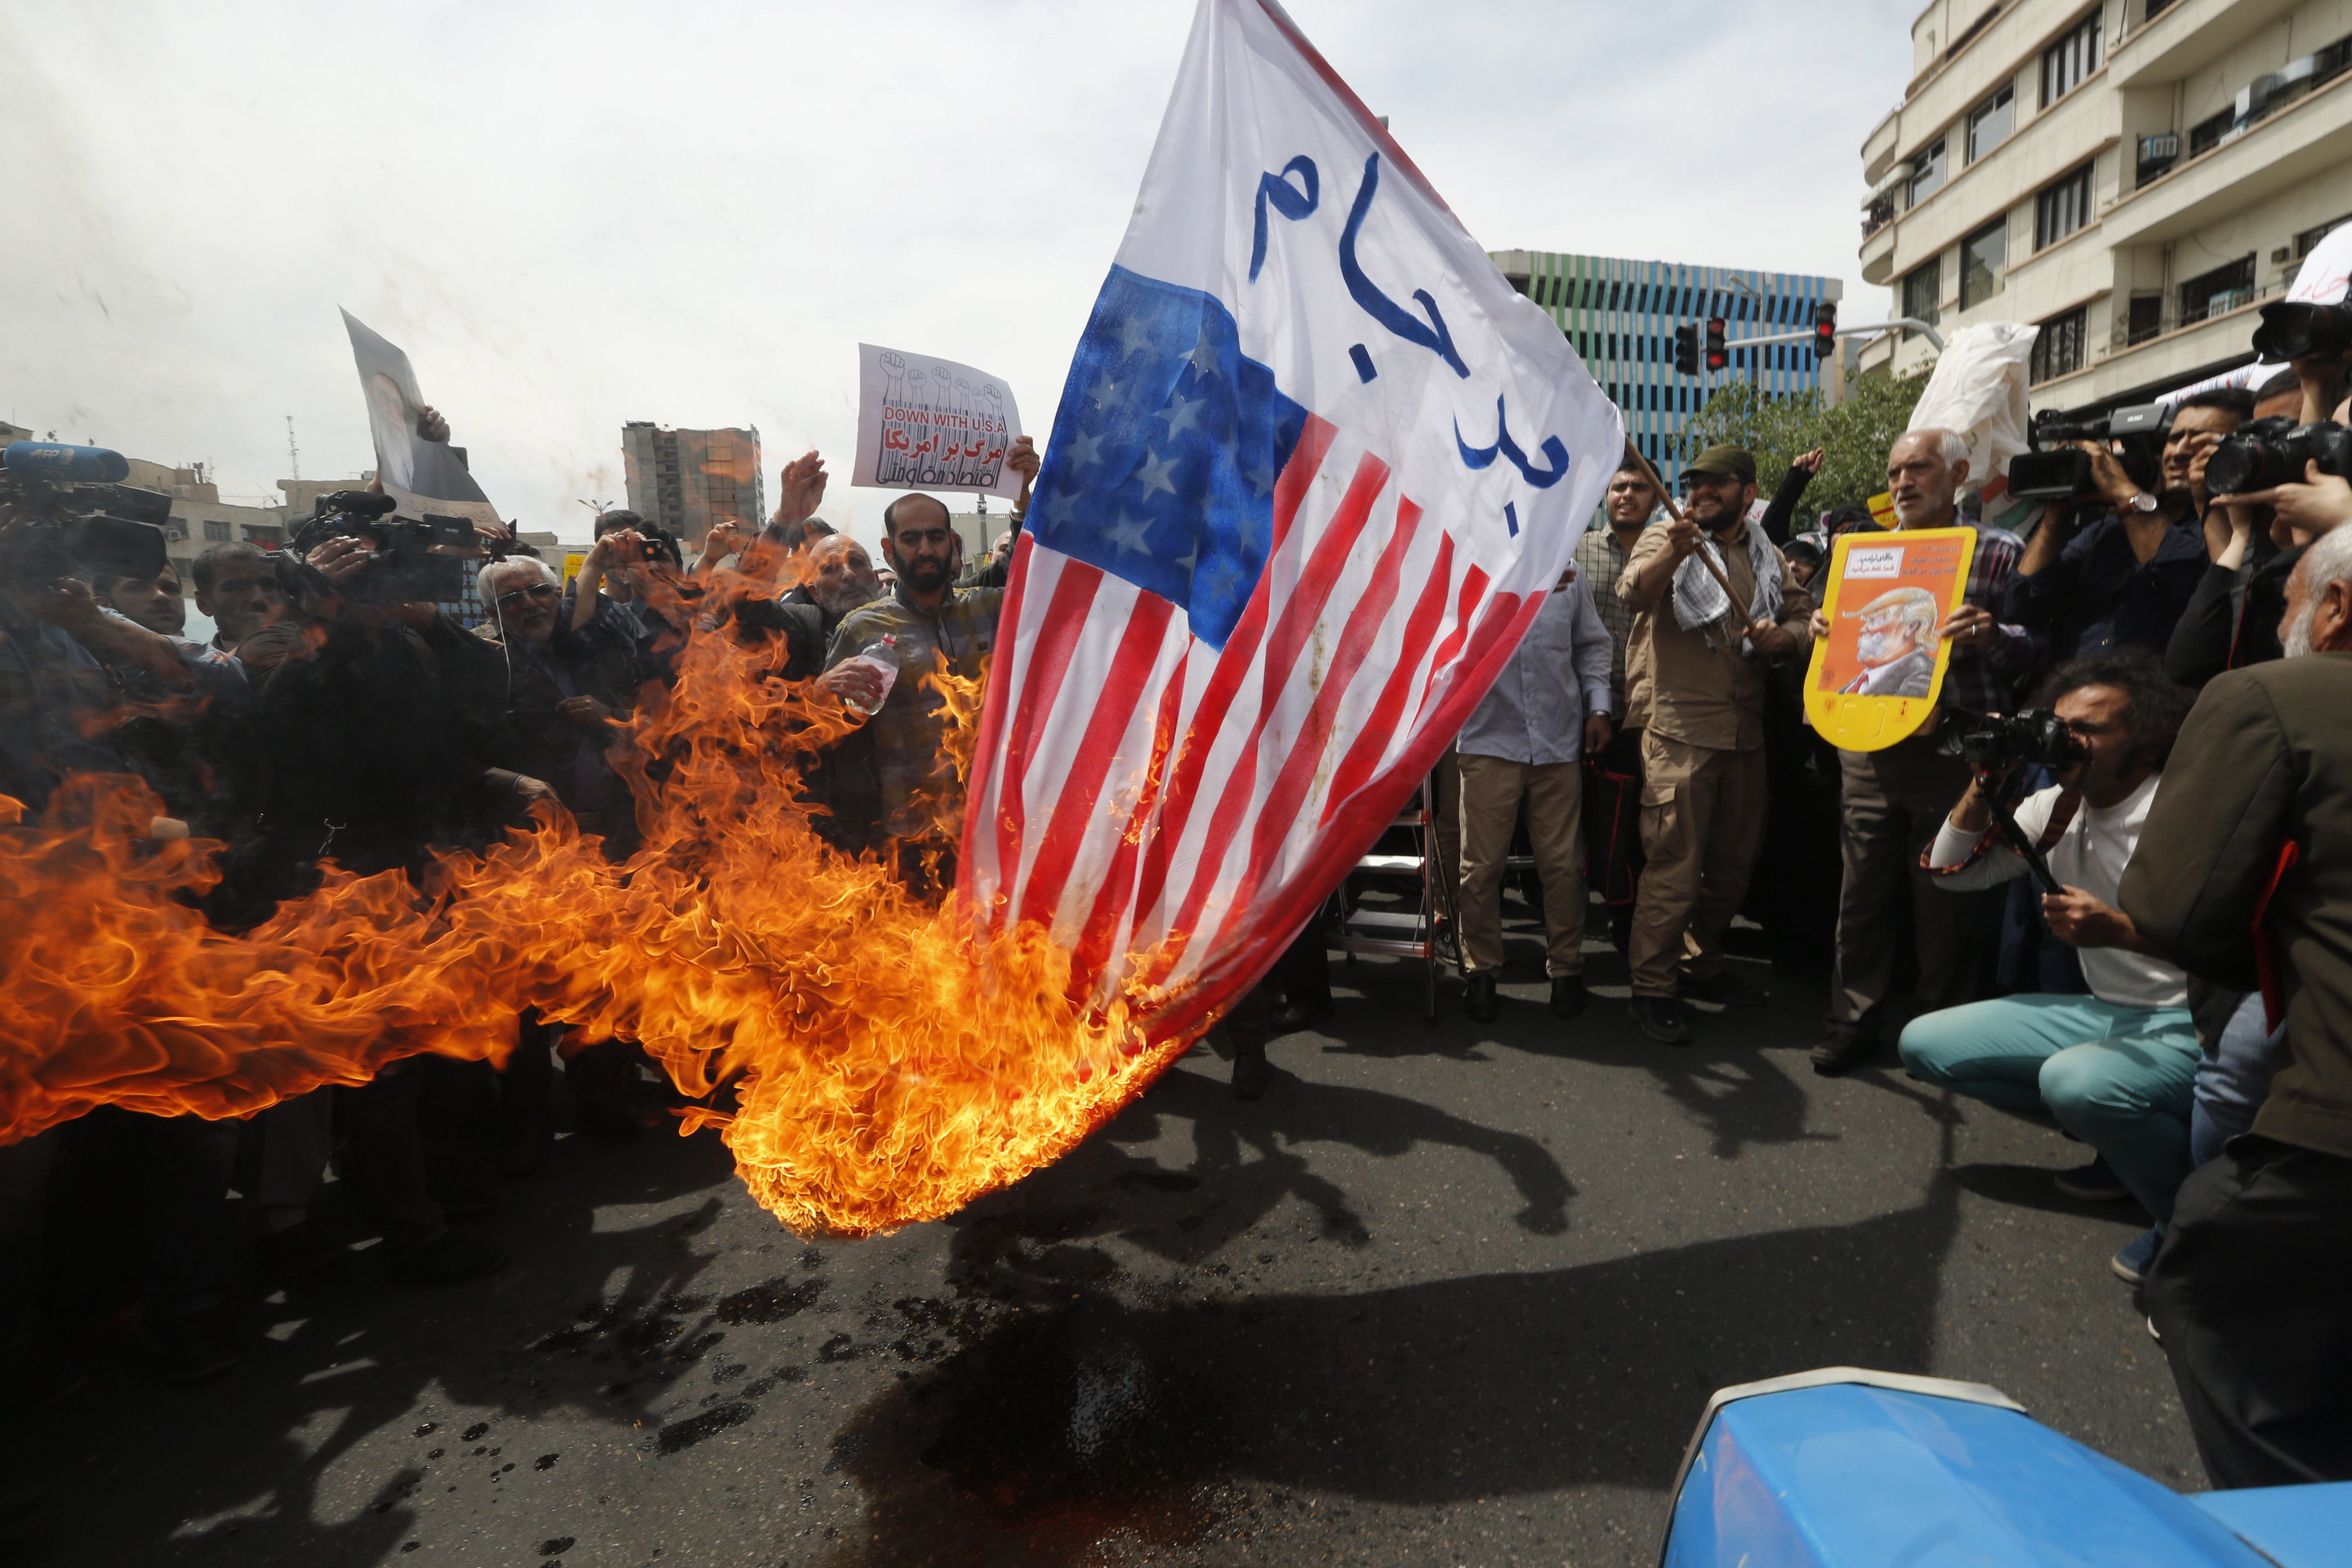 epa06727795 Iranians burn US flags during an anti-US protest after weekly Friday prayer ceremony in Tehran, Iran, 11 May 2018. Iranians gathered to protest against the US and President Donald Trump after withdrawal from a 2015 nuclear deal. Trump on 08 May 2018 announced that US will withdraw from the nuclear deal. Foreign ministers from six world powers and Iran finally achieved an agreement to prevent the Islamic republic from developing nuclear weapons, Western diplomats said in Vienna on 14 July 2015.  EPA/STRINGER